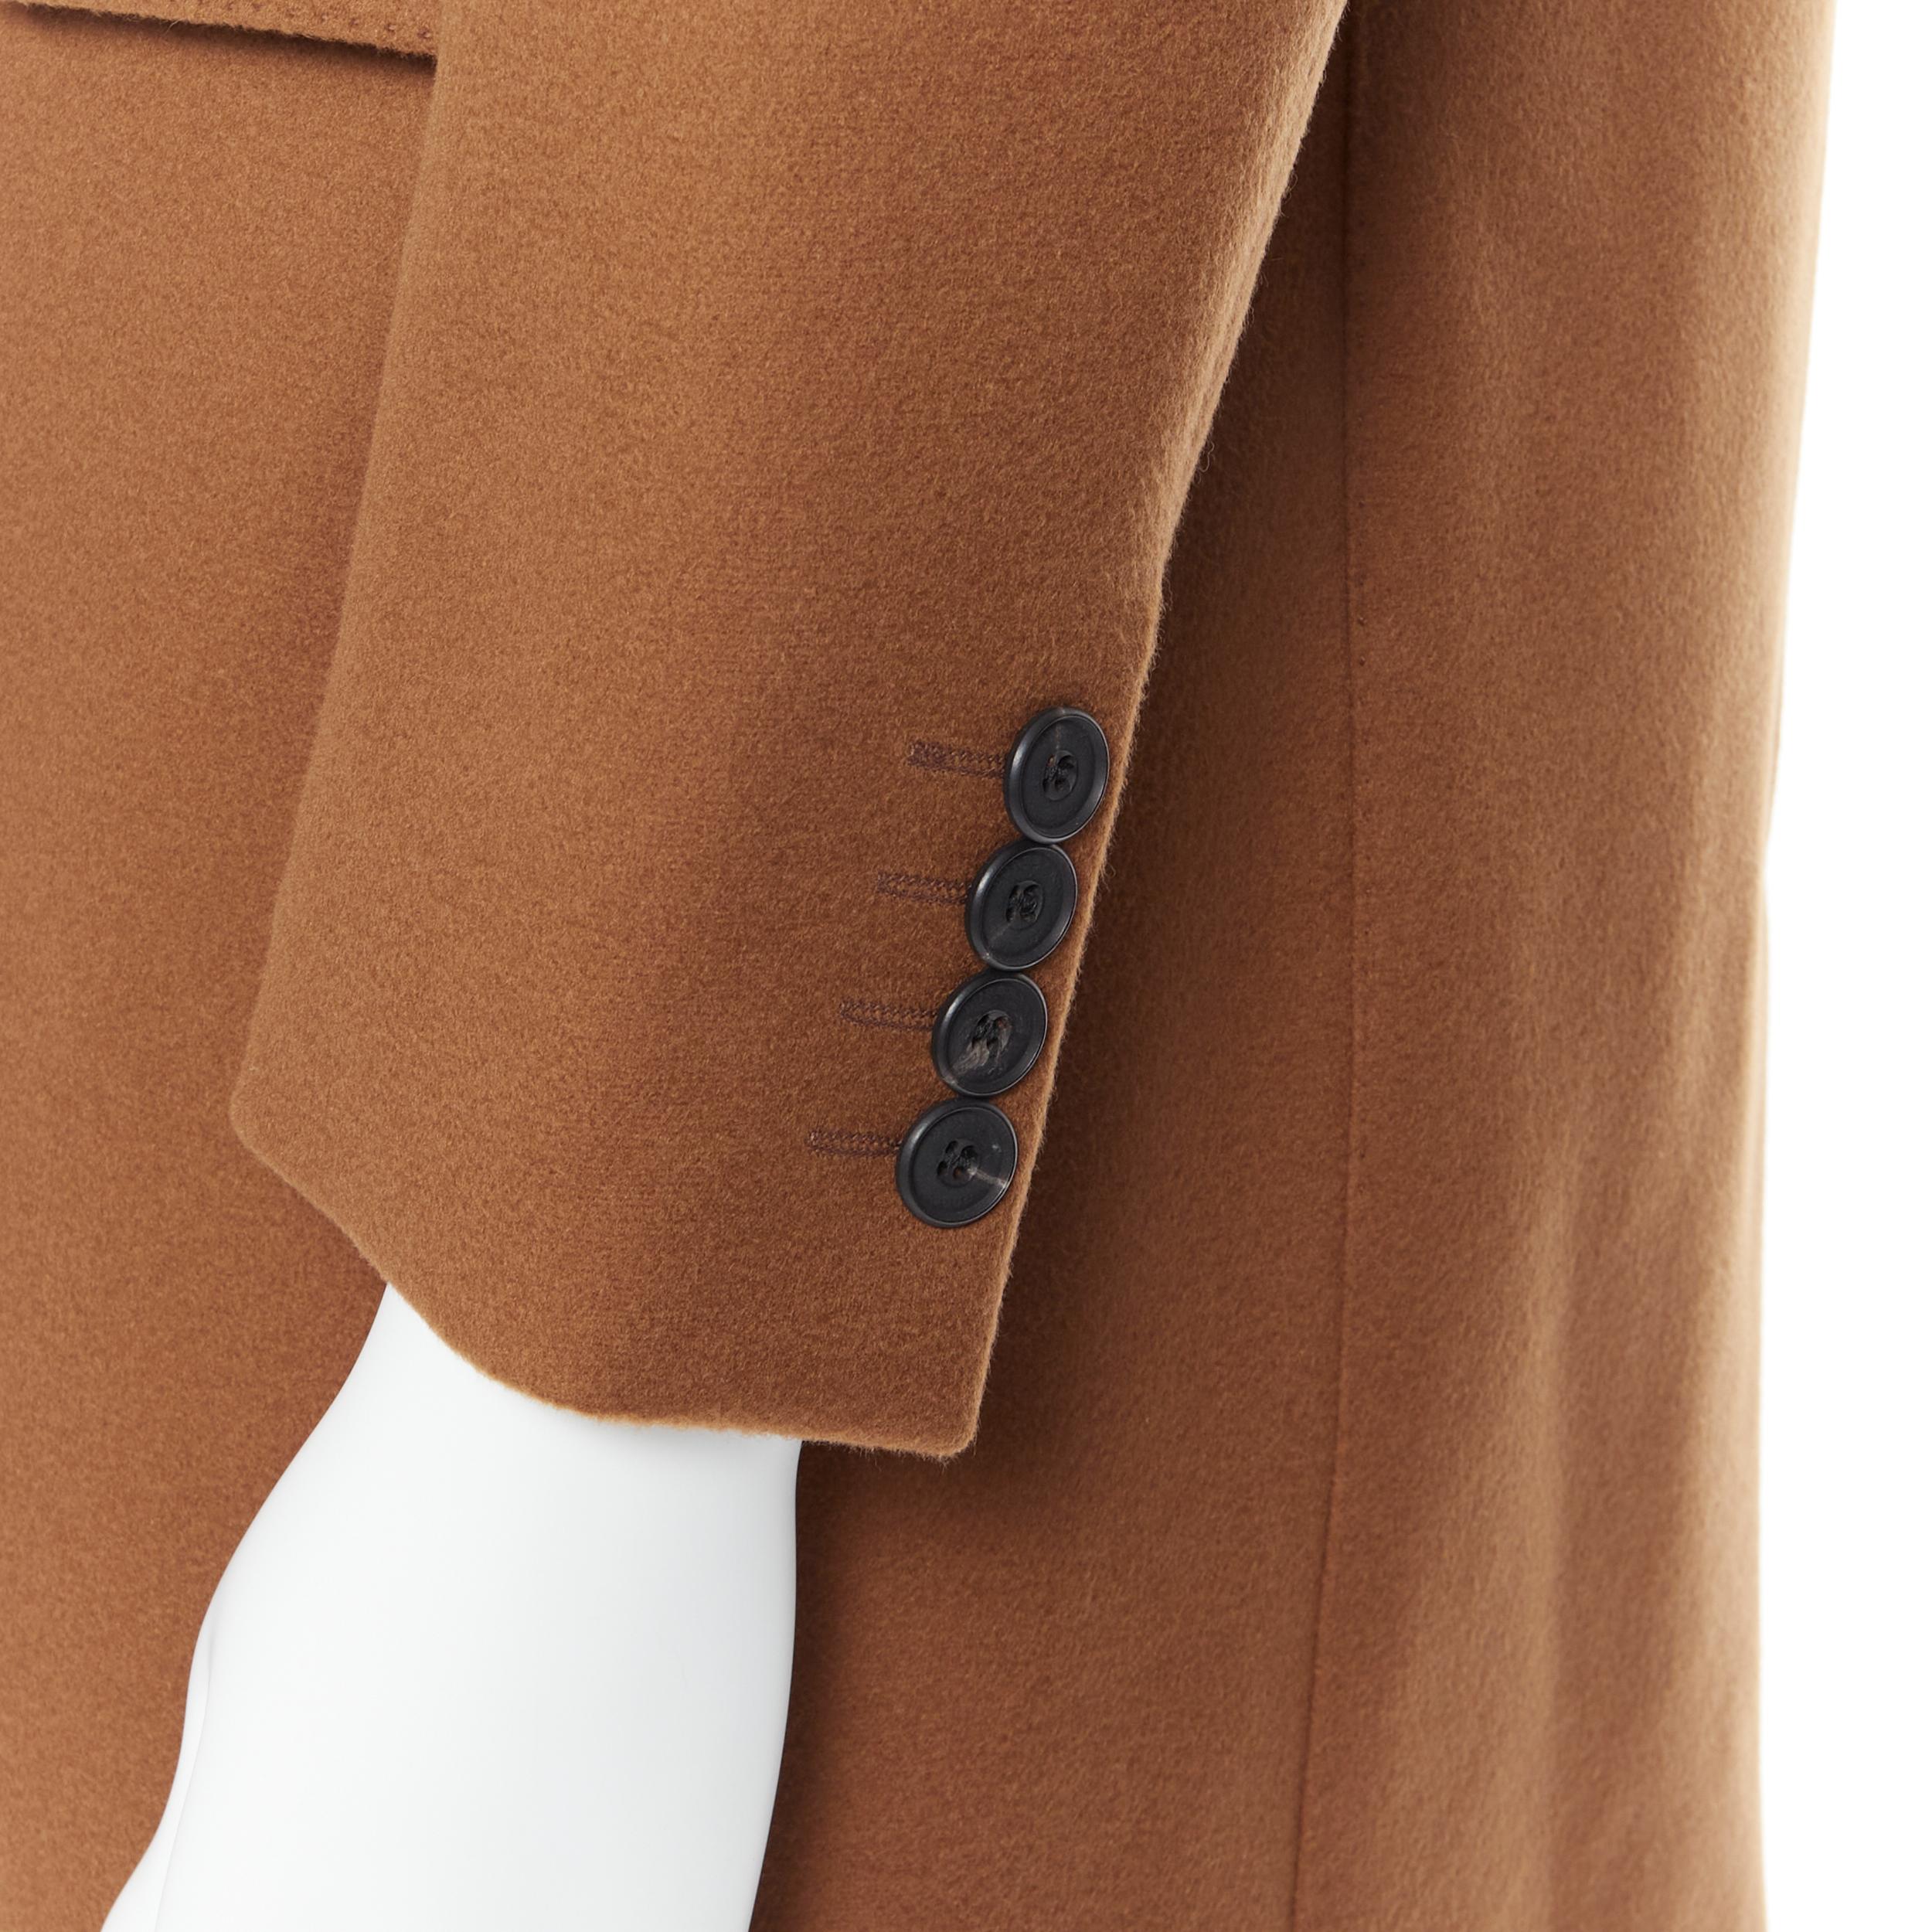 BURBERRY PRORSUM 100% cashmere camel brown tailored coat EU44 XS Reference: PRCN/A00036 
Brand: Burberry 
Material: Cashmere 
Color: Camel 
Pattern: Solid 
Closure: Button 
Extra Detail: 100% cashmere Spread collar. 3-pocket design 4-button cuff.